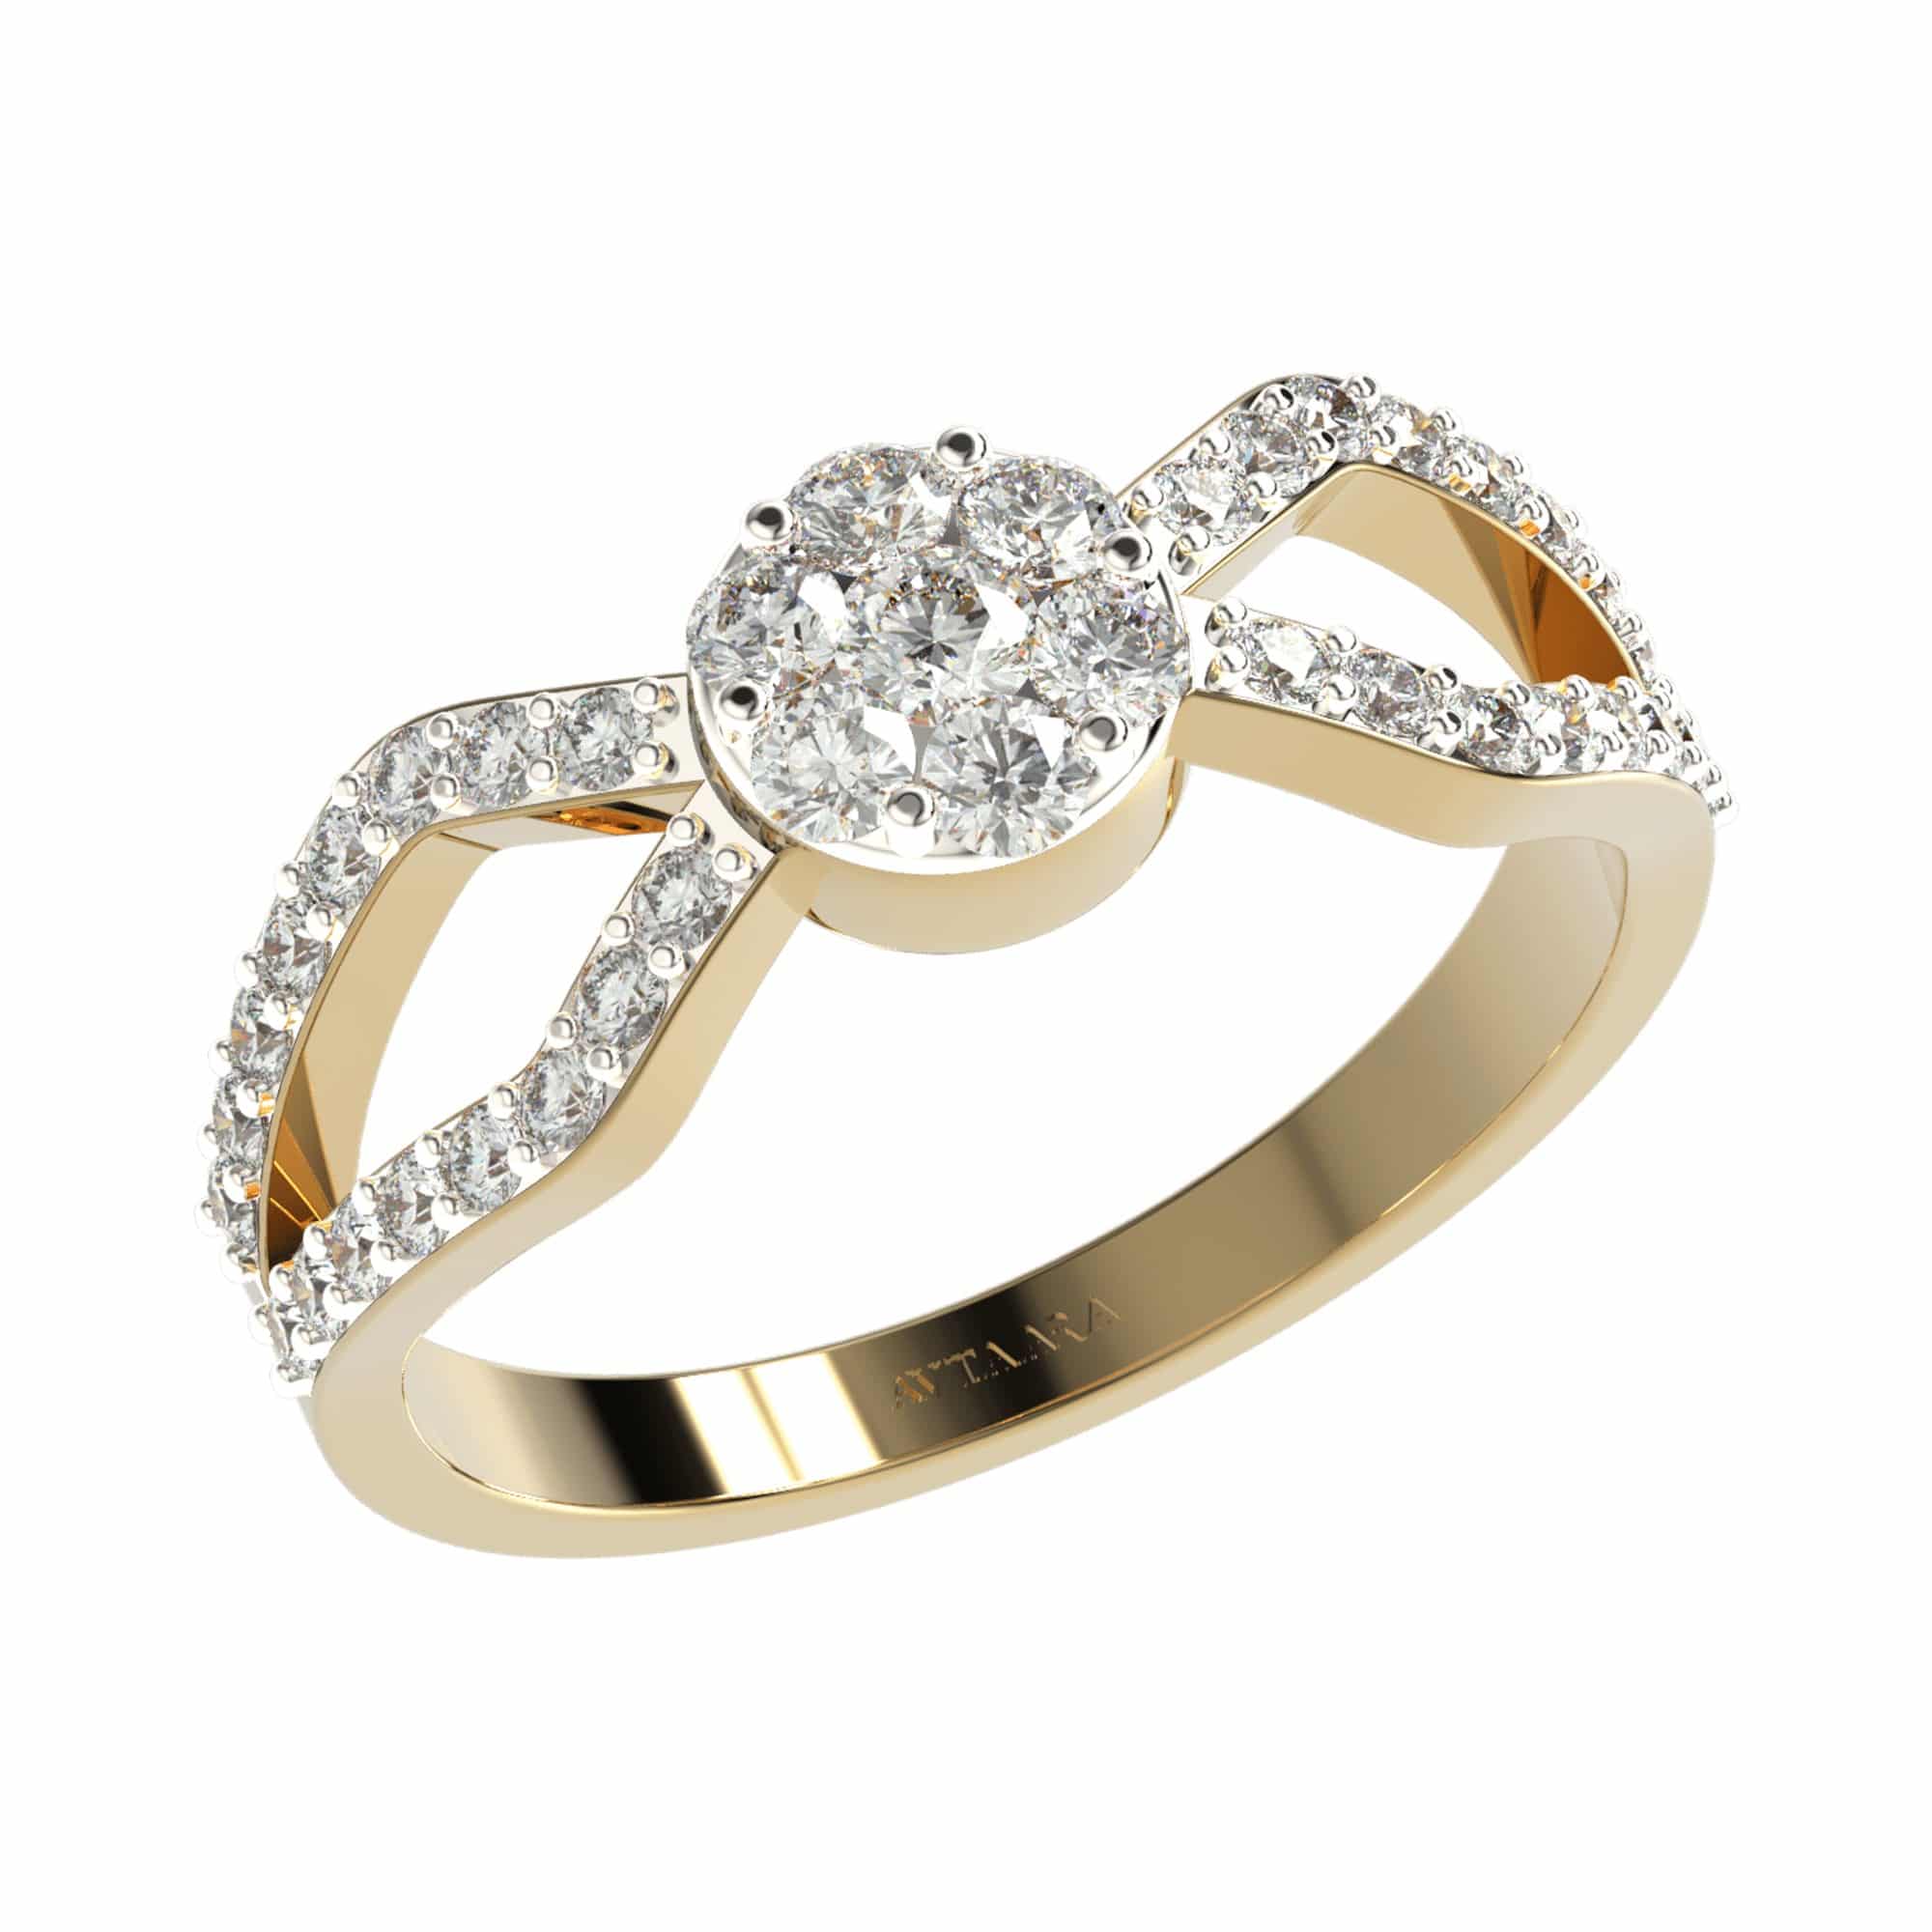 Rounded cage ring